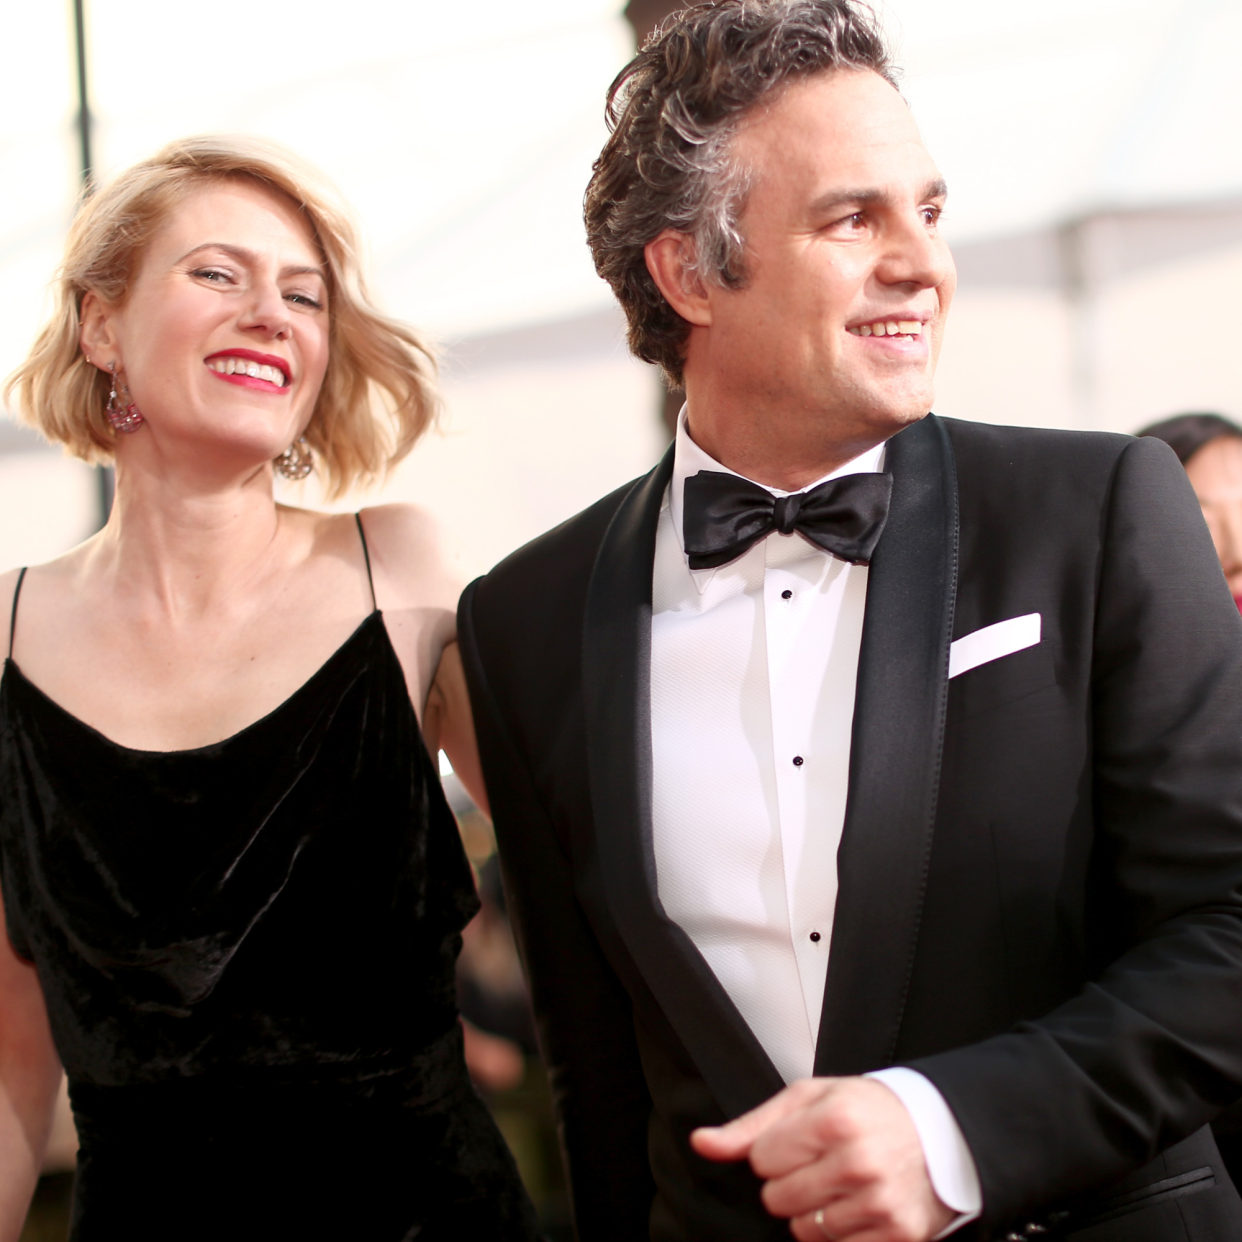  Actor Mark Ruffalo (R) and Sunrise Coigney attend The 22nd Annual Screen Actors Guild Awards at The Shrine Auditorium on January 30, 2016 in Los Angeles, California. 